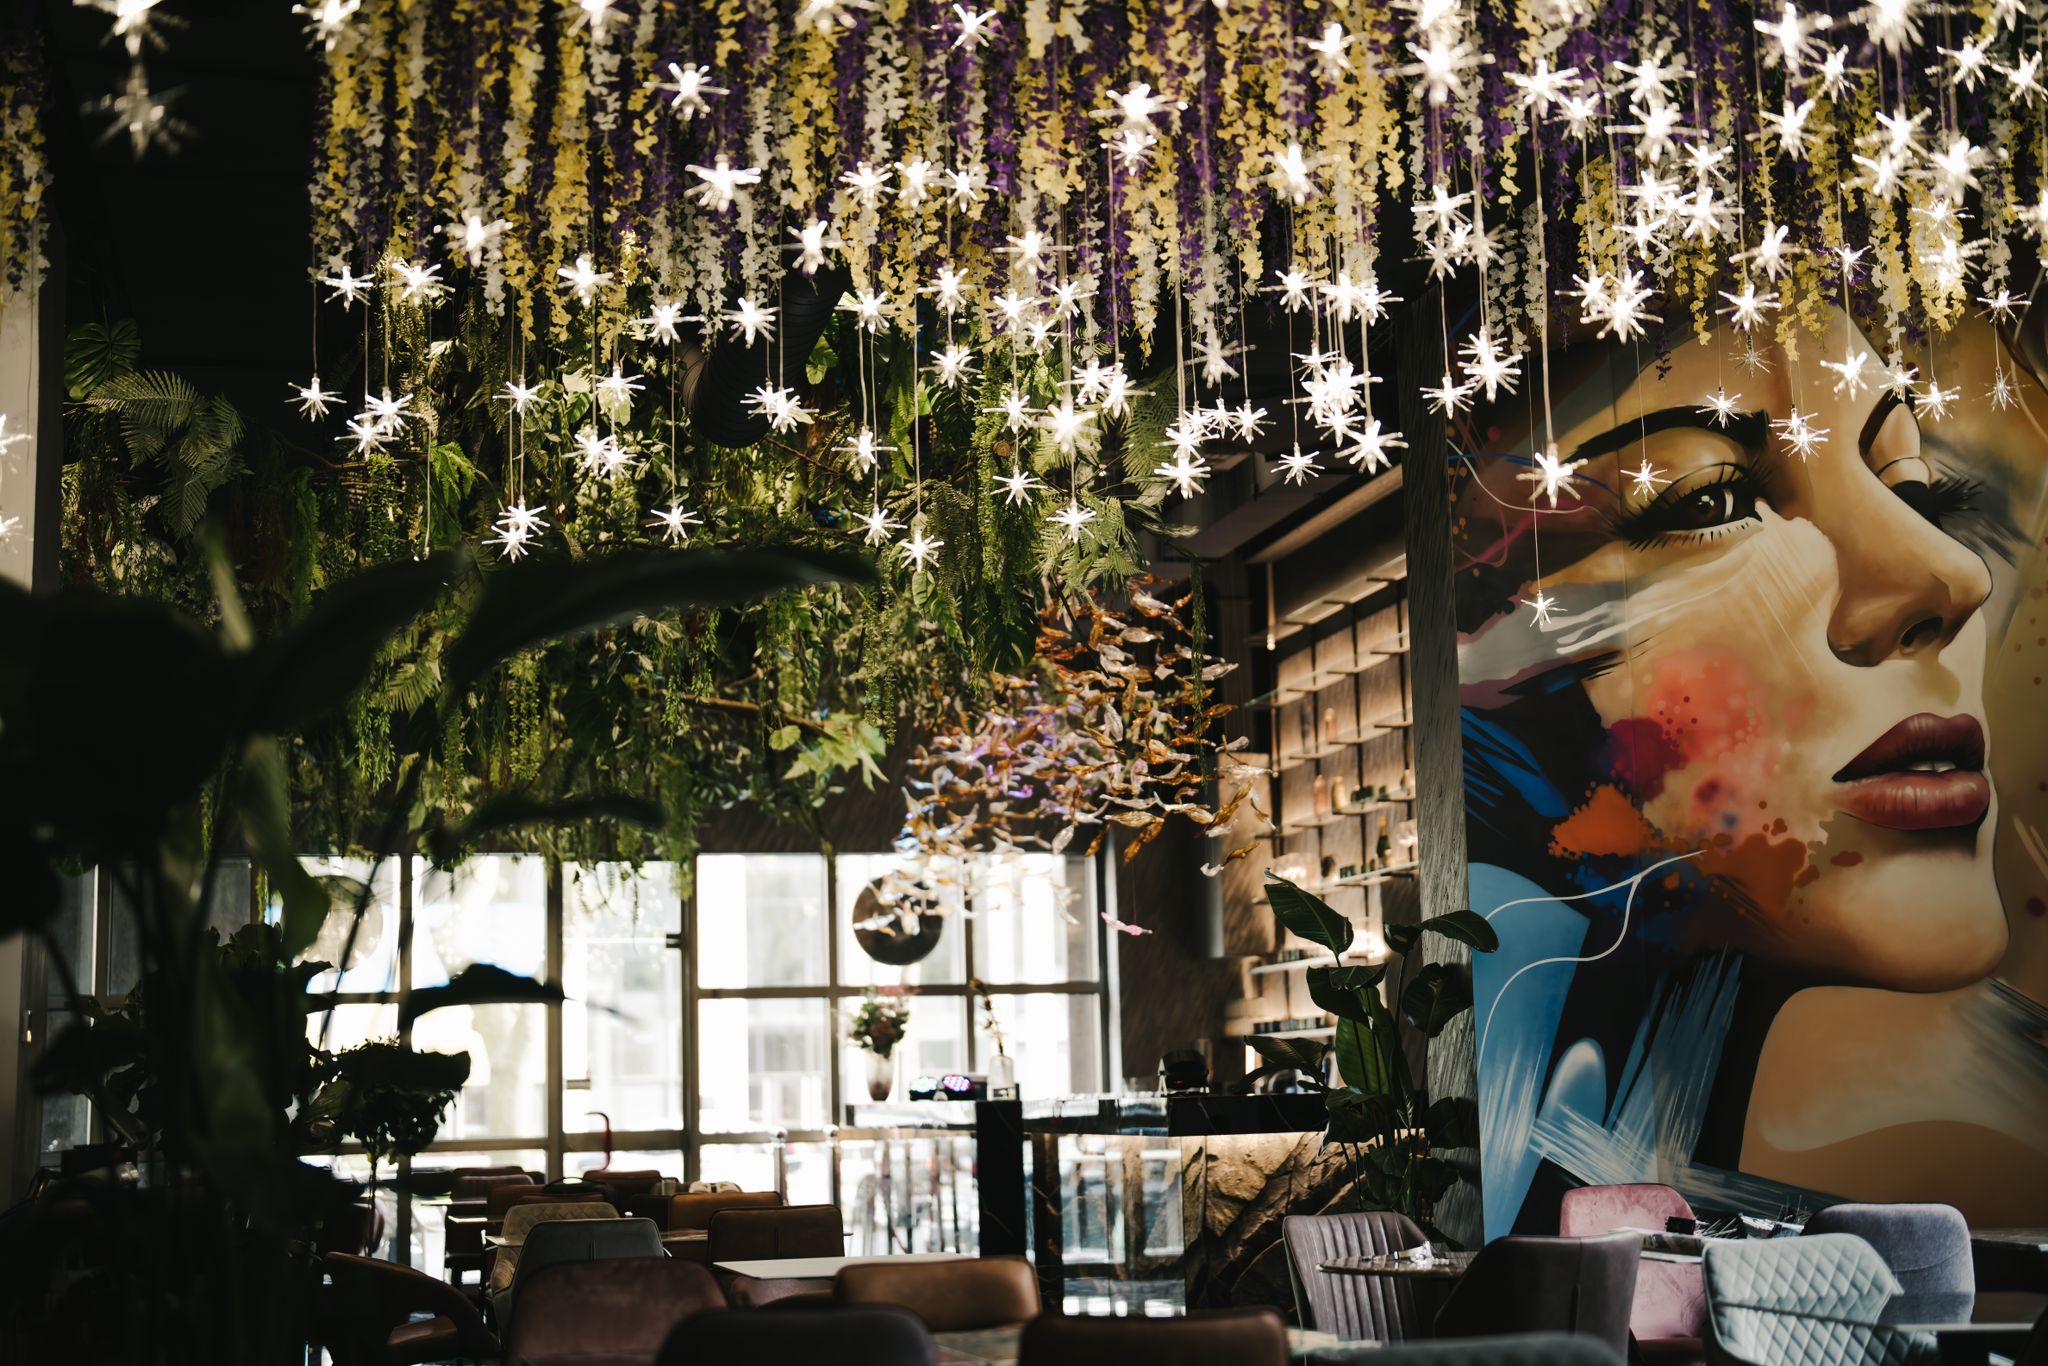 interior of the restaurant with flowers and starlights on the ceiling